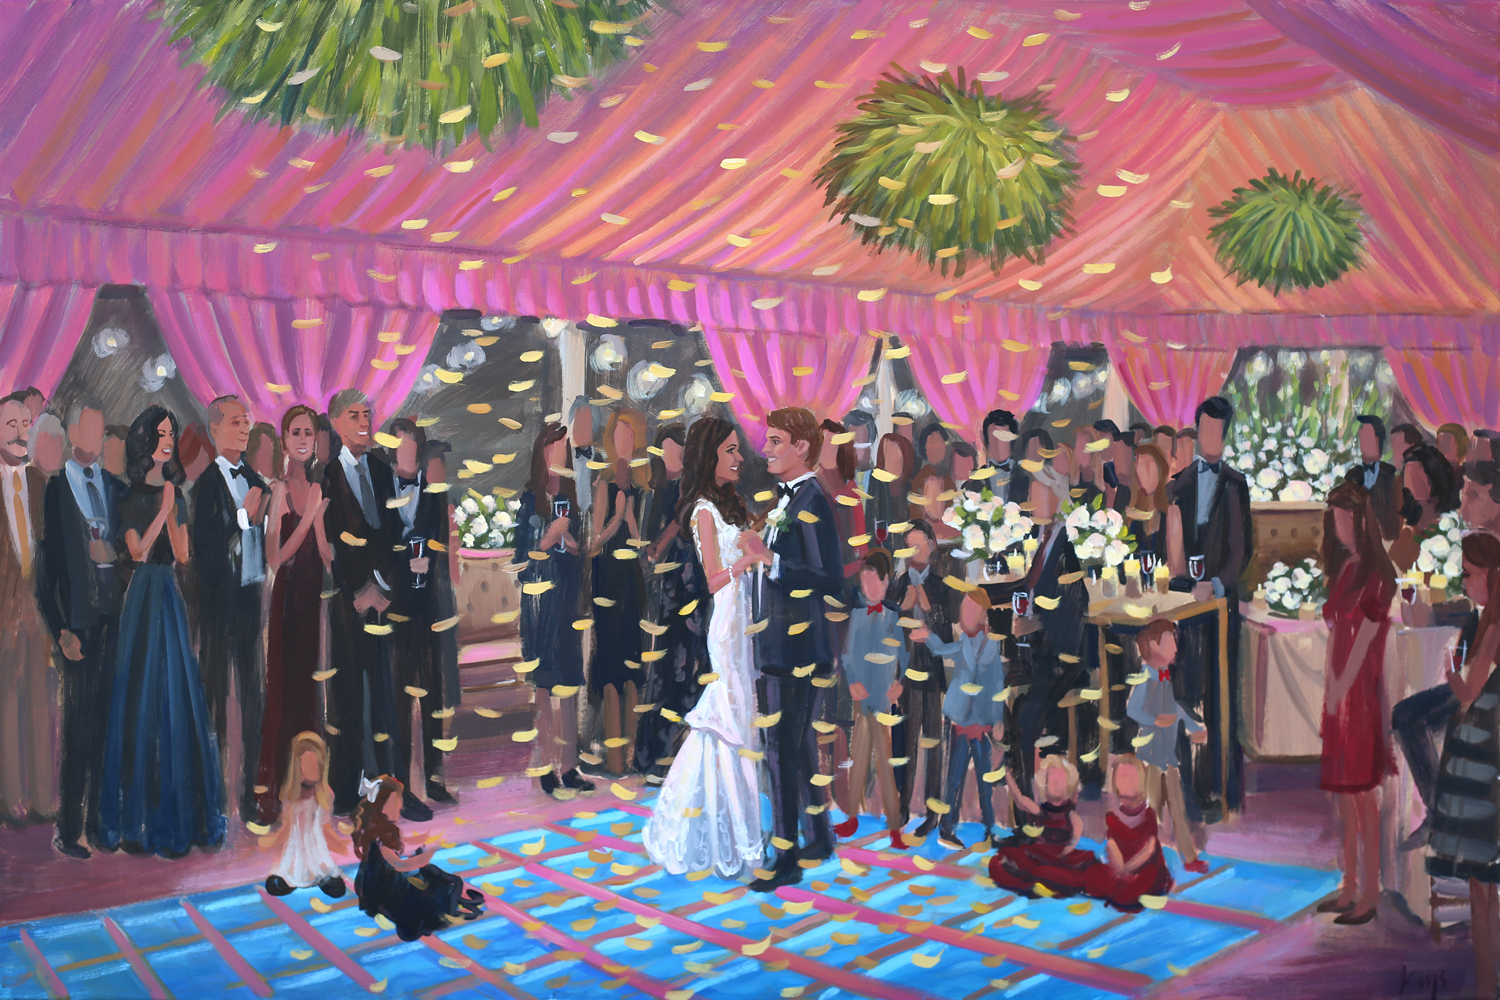 Ben Keys, Live Wedding Painter, captured Ashlyn + Kevin’s New Year’s Eve wedding at the beautiful Figure 8 Island Yacht Club located in Wilmington, NC.